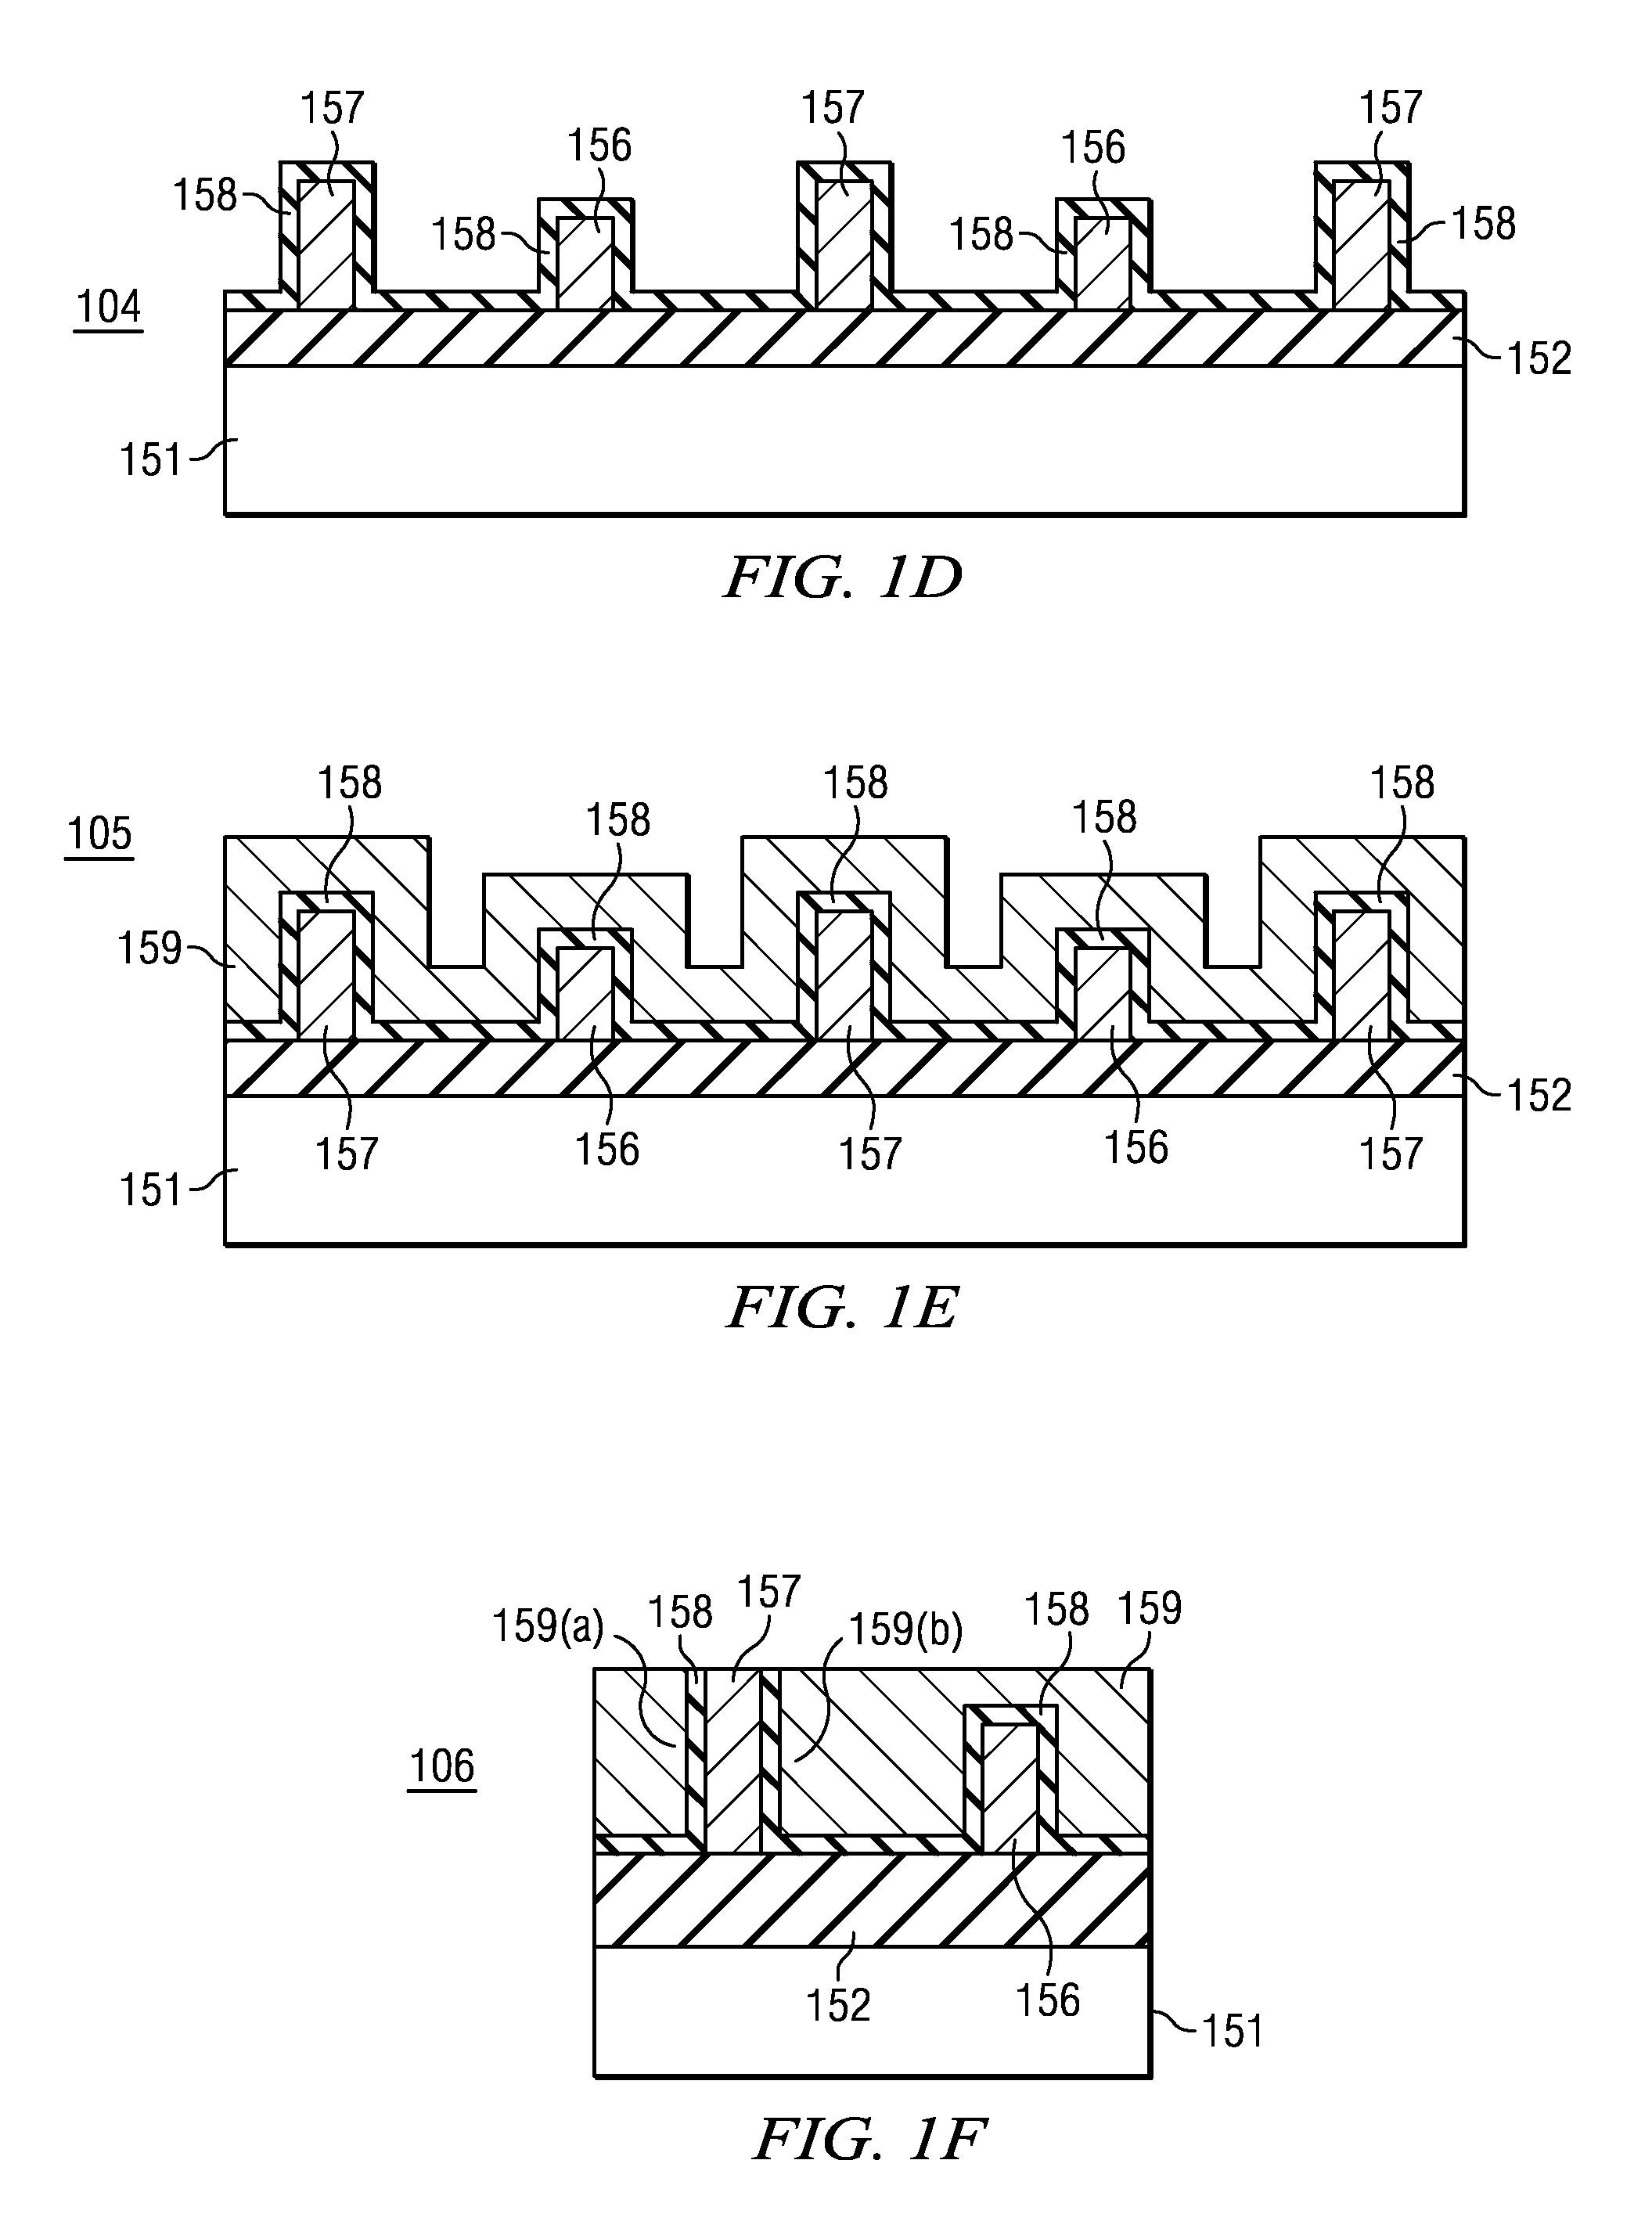 Process for forming integrated circuits with both split gate and common gate FinFET transistors